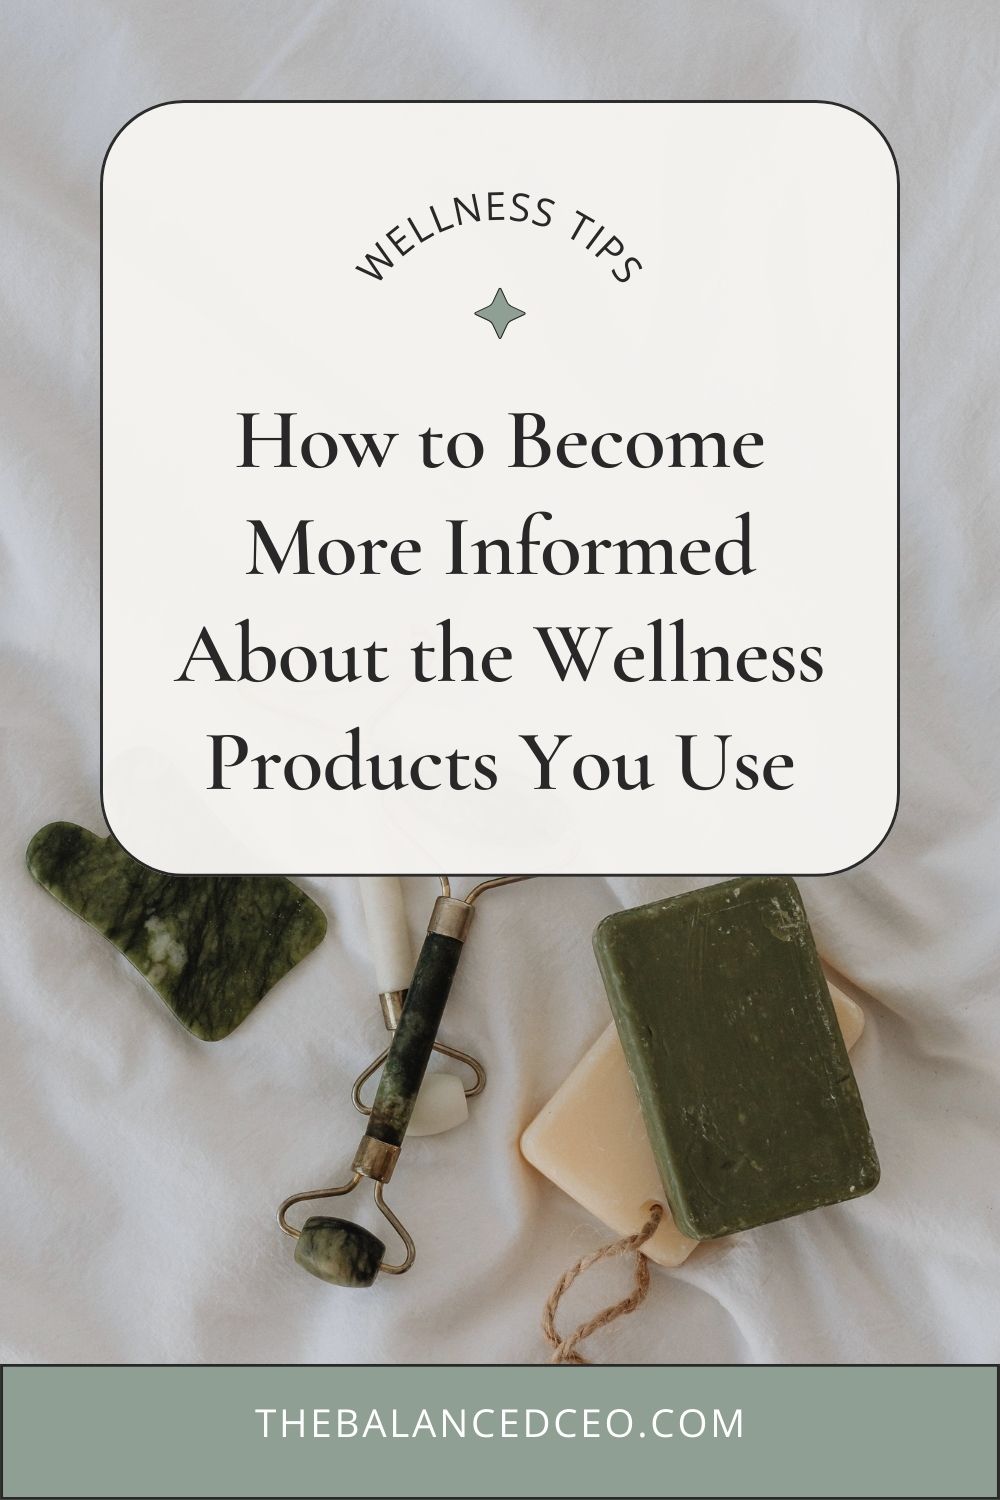 How to Become More Informed About the Wellness Products You Use